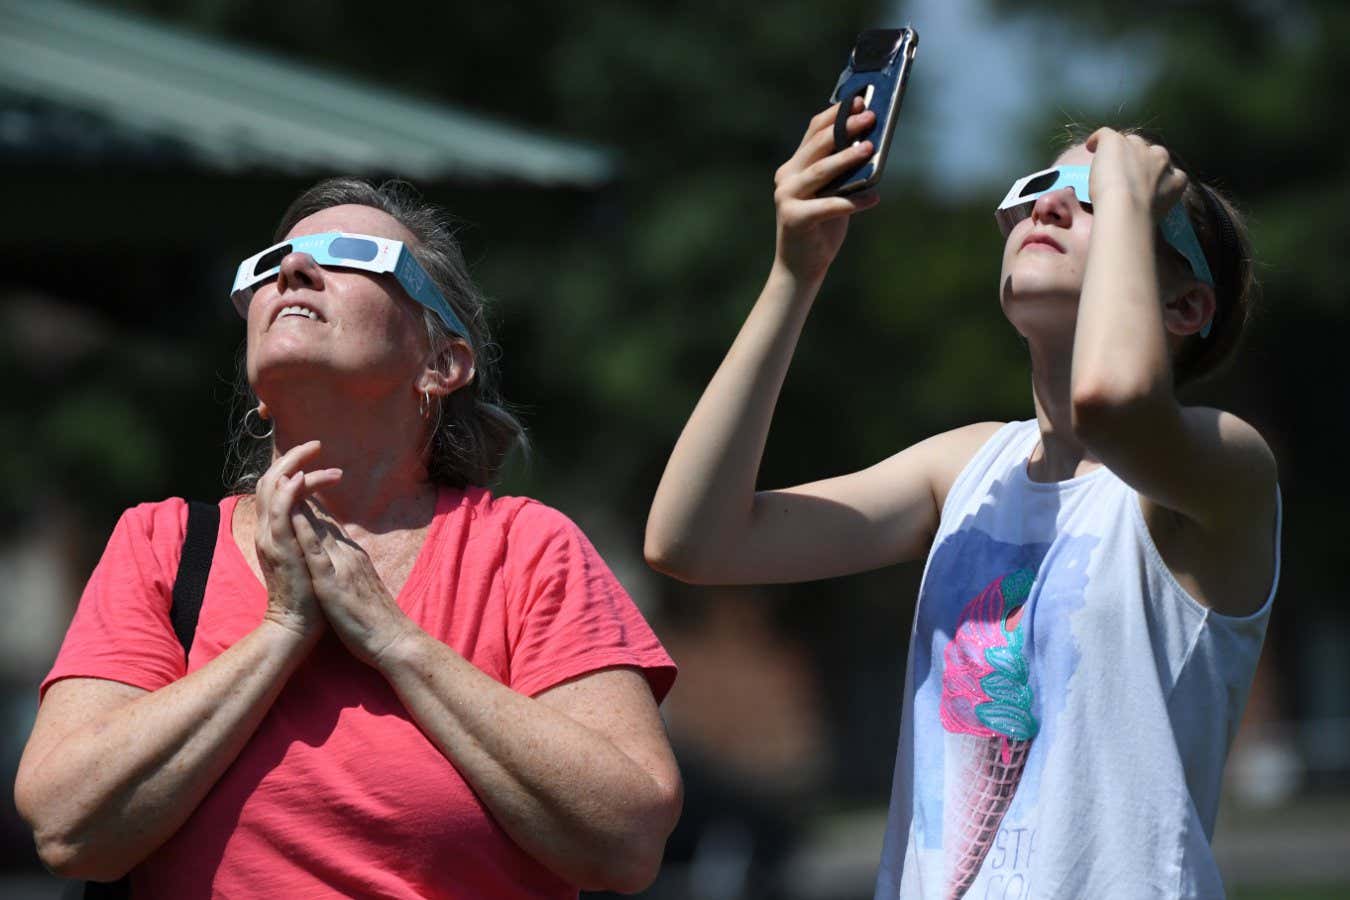 How to view an eclipse safely and what to look for in eclipse glasses